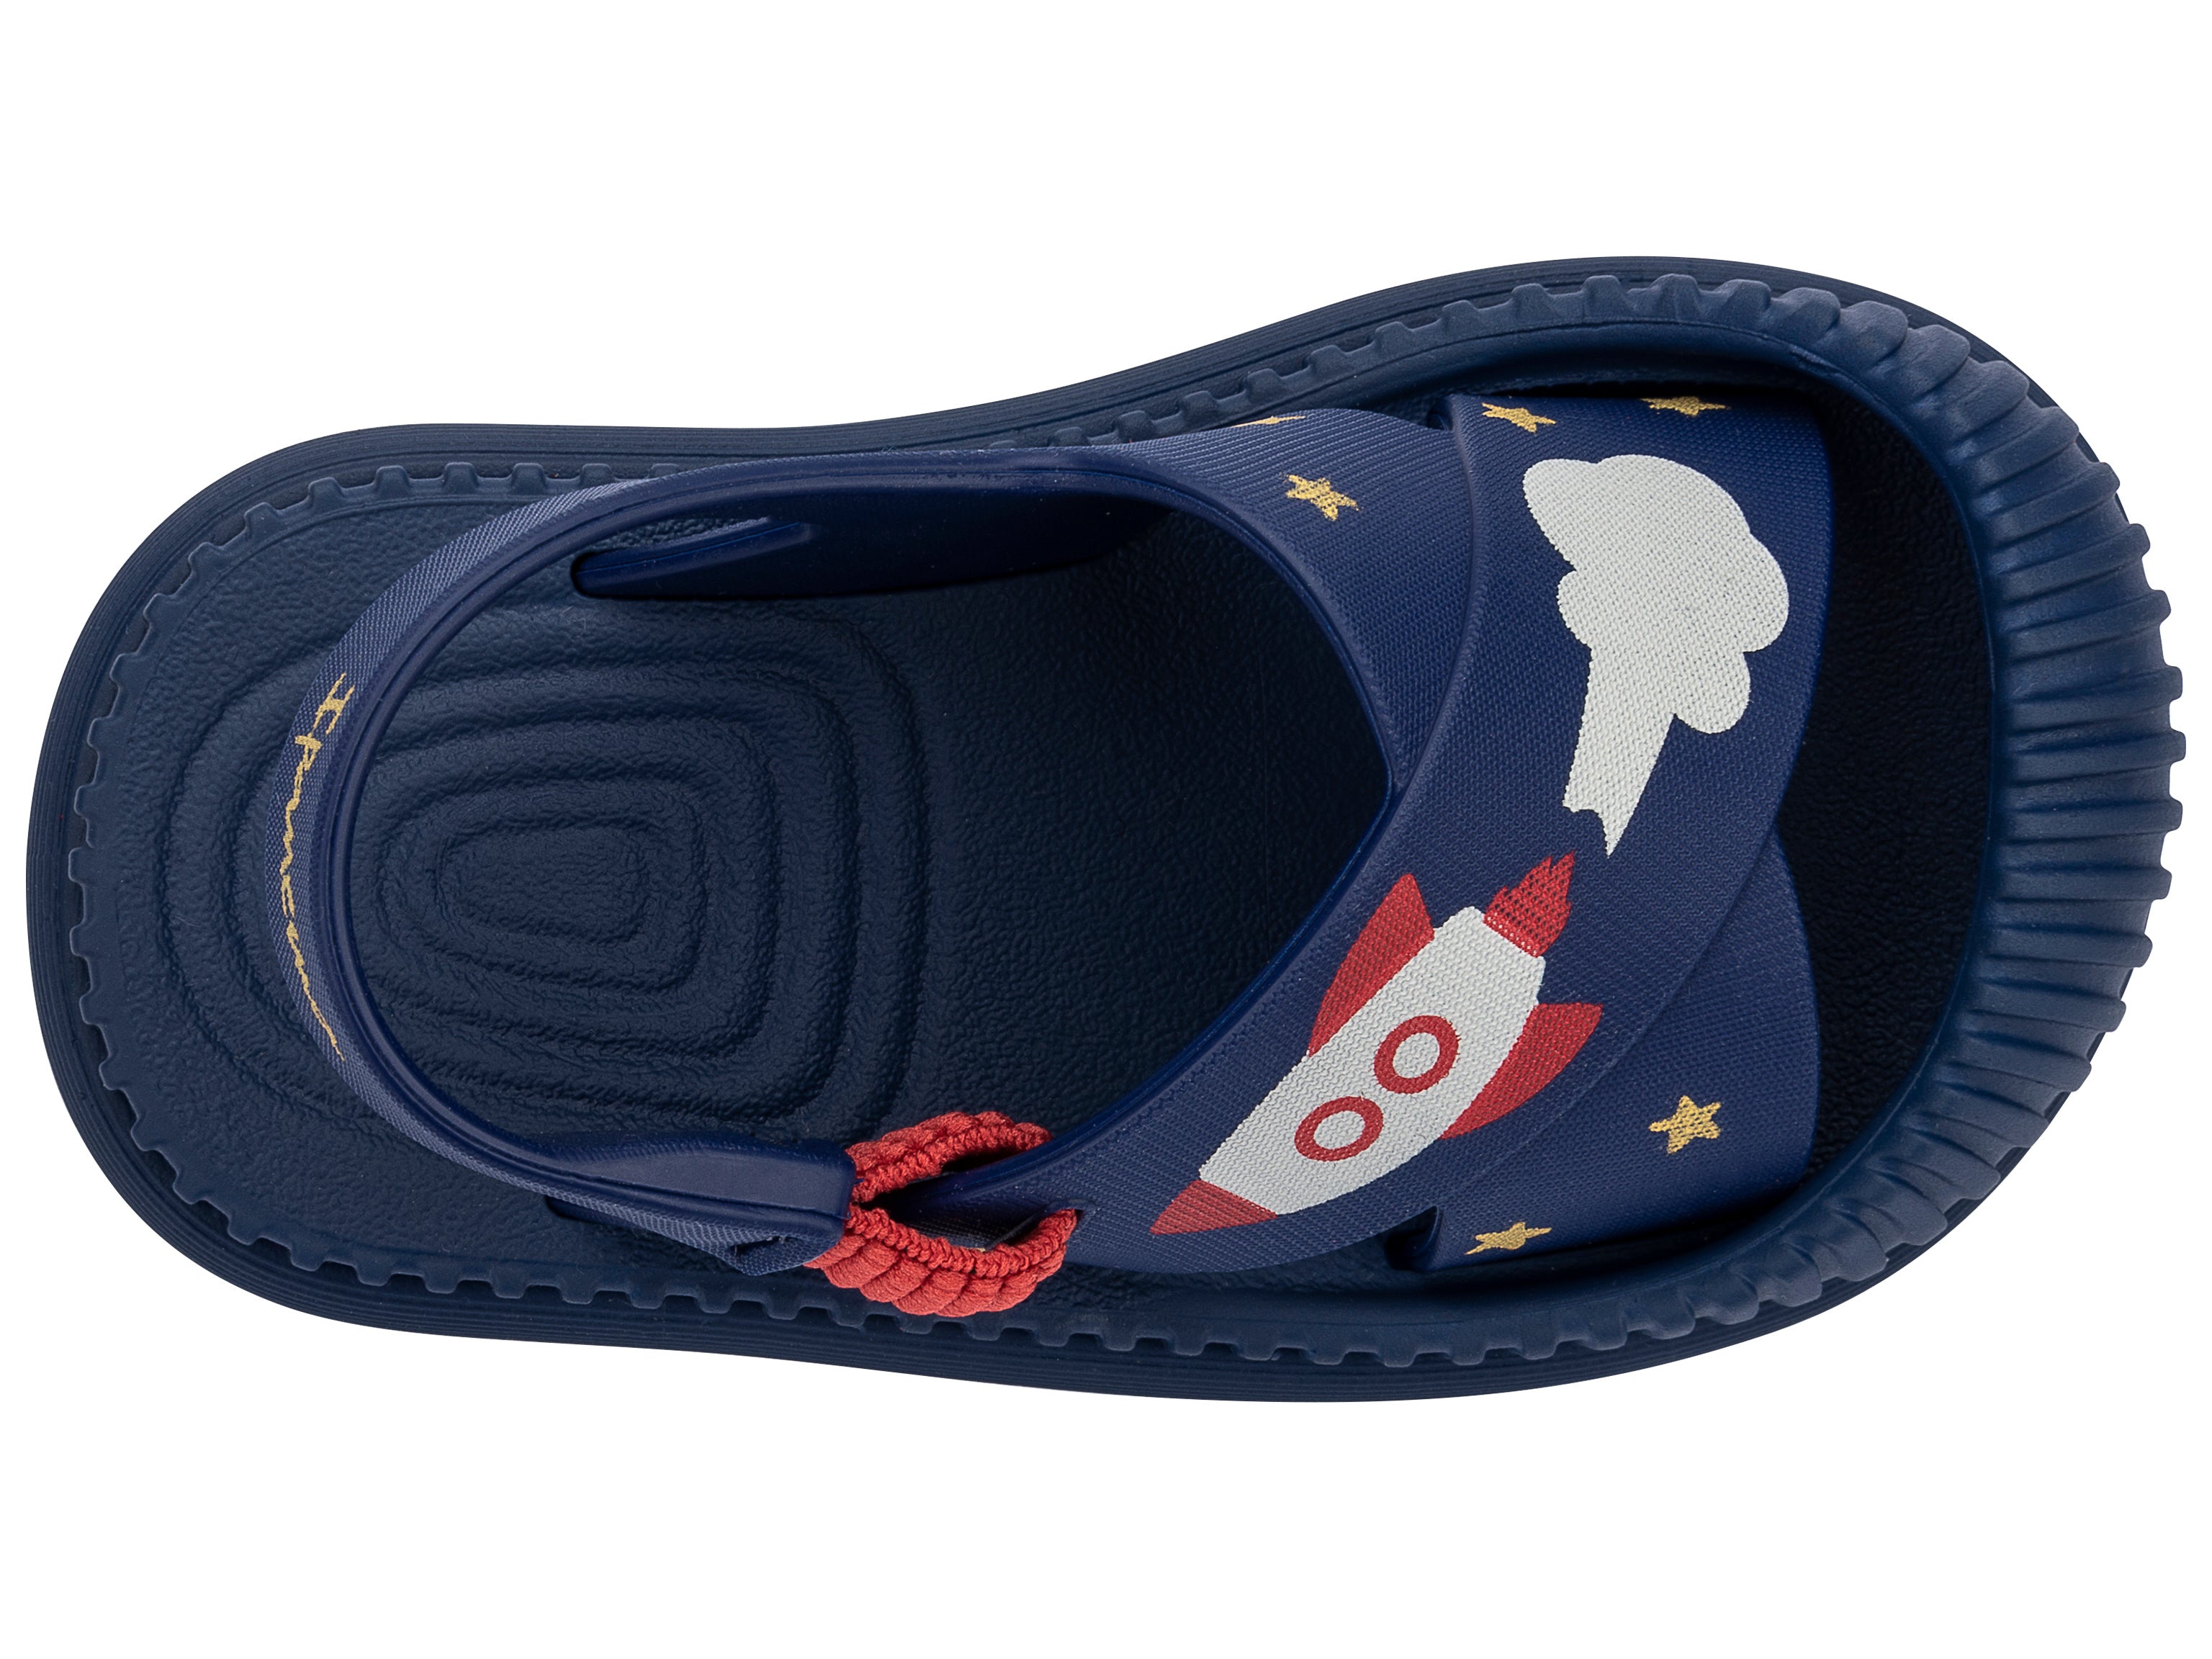 Top view of a blue Ipanema Cute baby sandal with rocket ship on the strap.